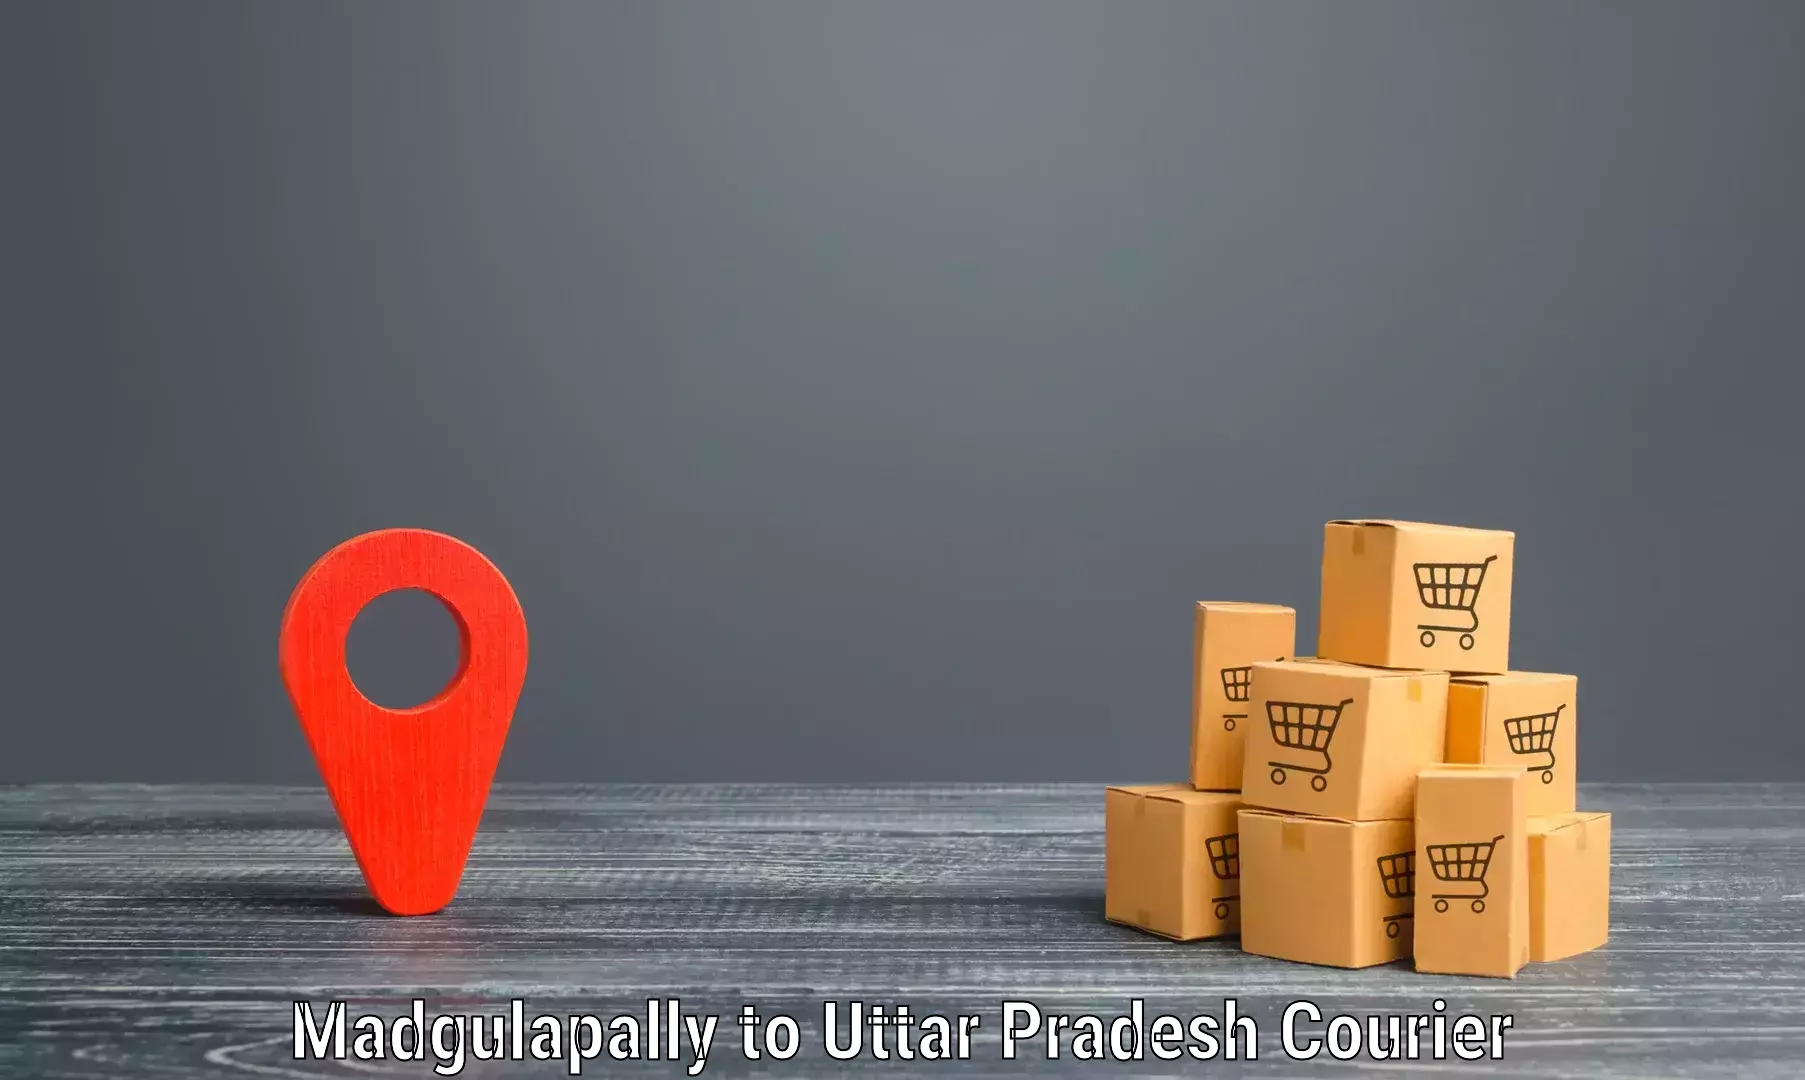 Pharmaceutical courier Madgulapally to Chitrakoot